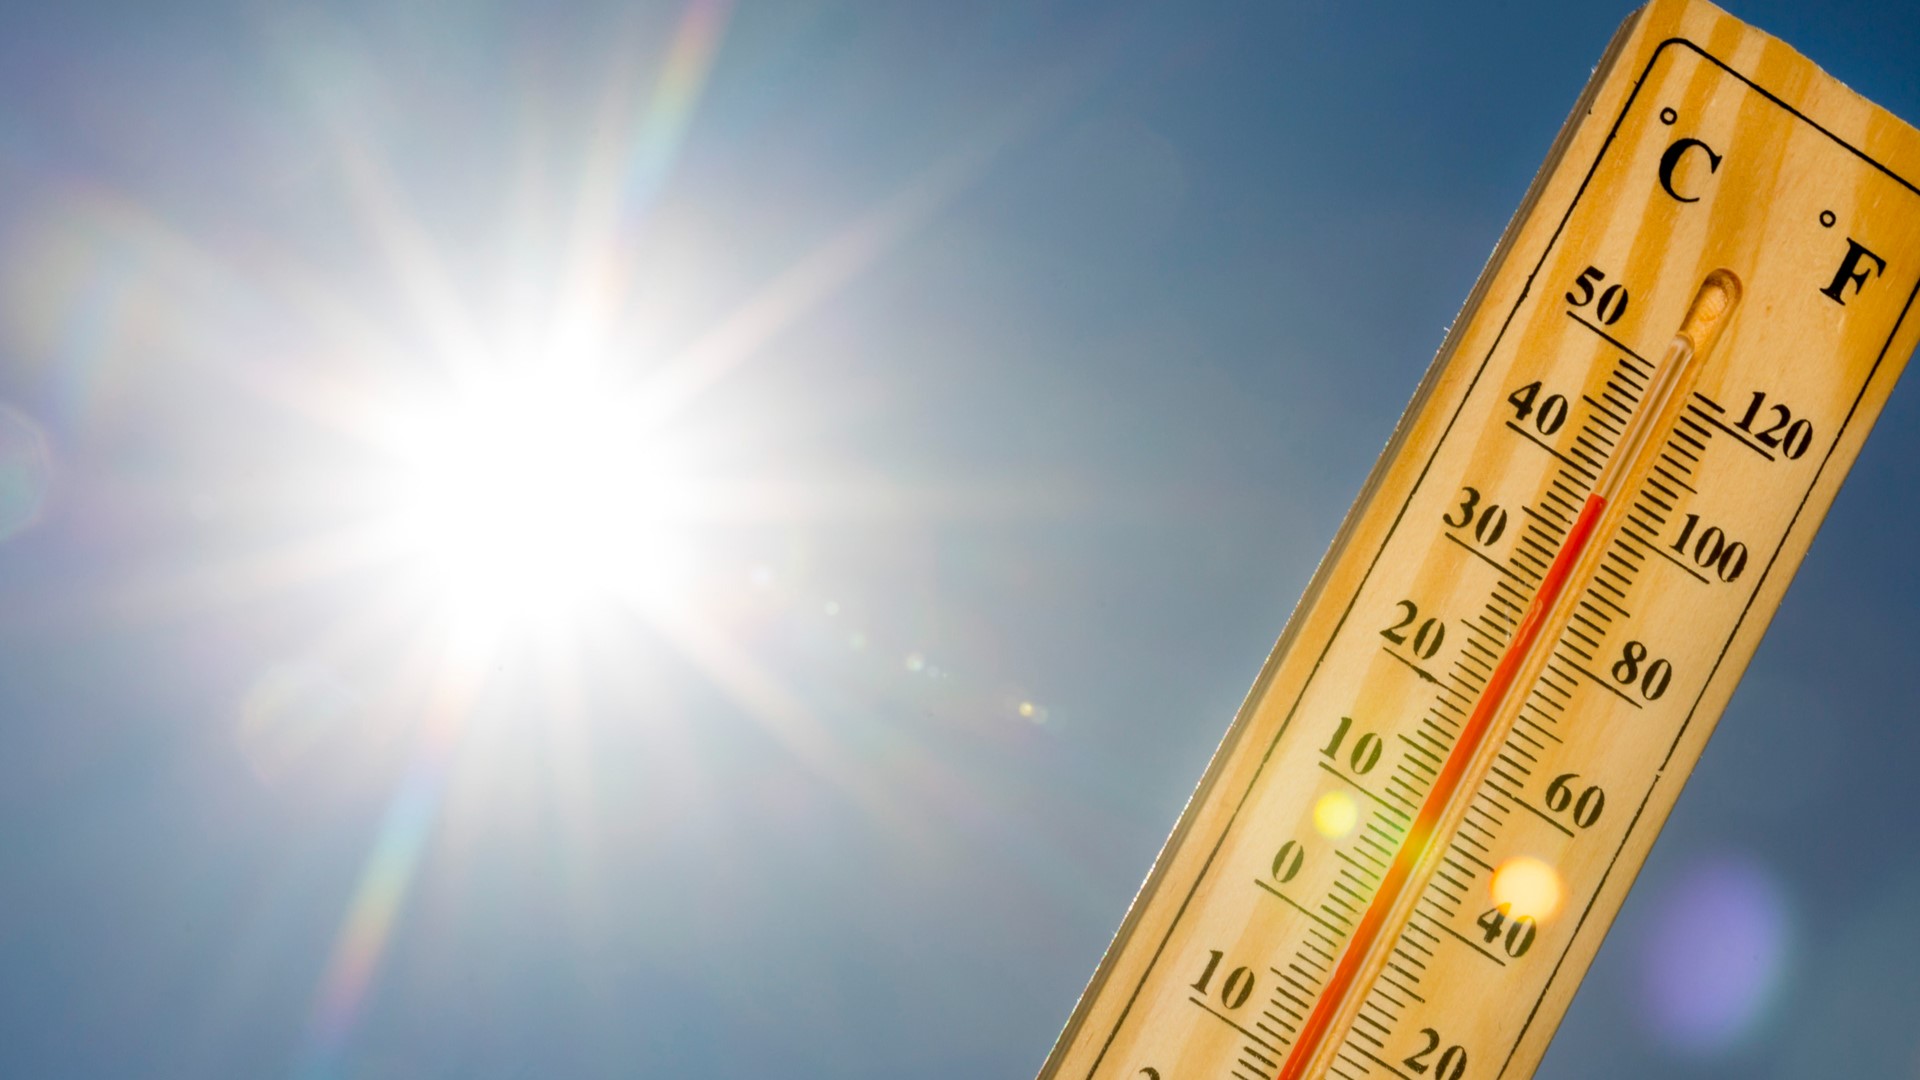 Dr. Greg Newman, medical director at Baylor Scott & White Hillcrest Convenient Care in Waco said our bodies have to get acclimated to the warmer temperatures.